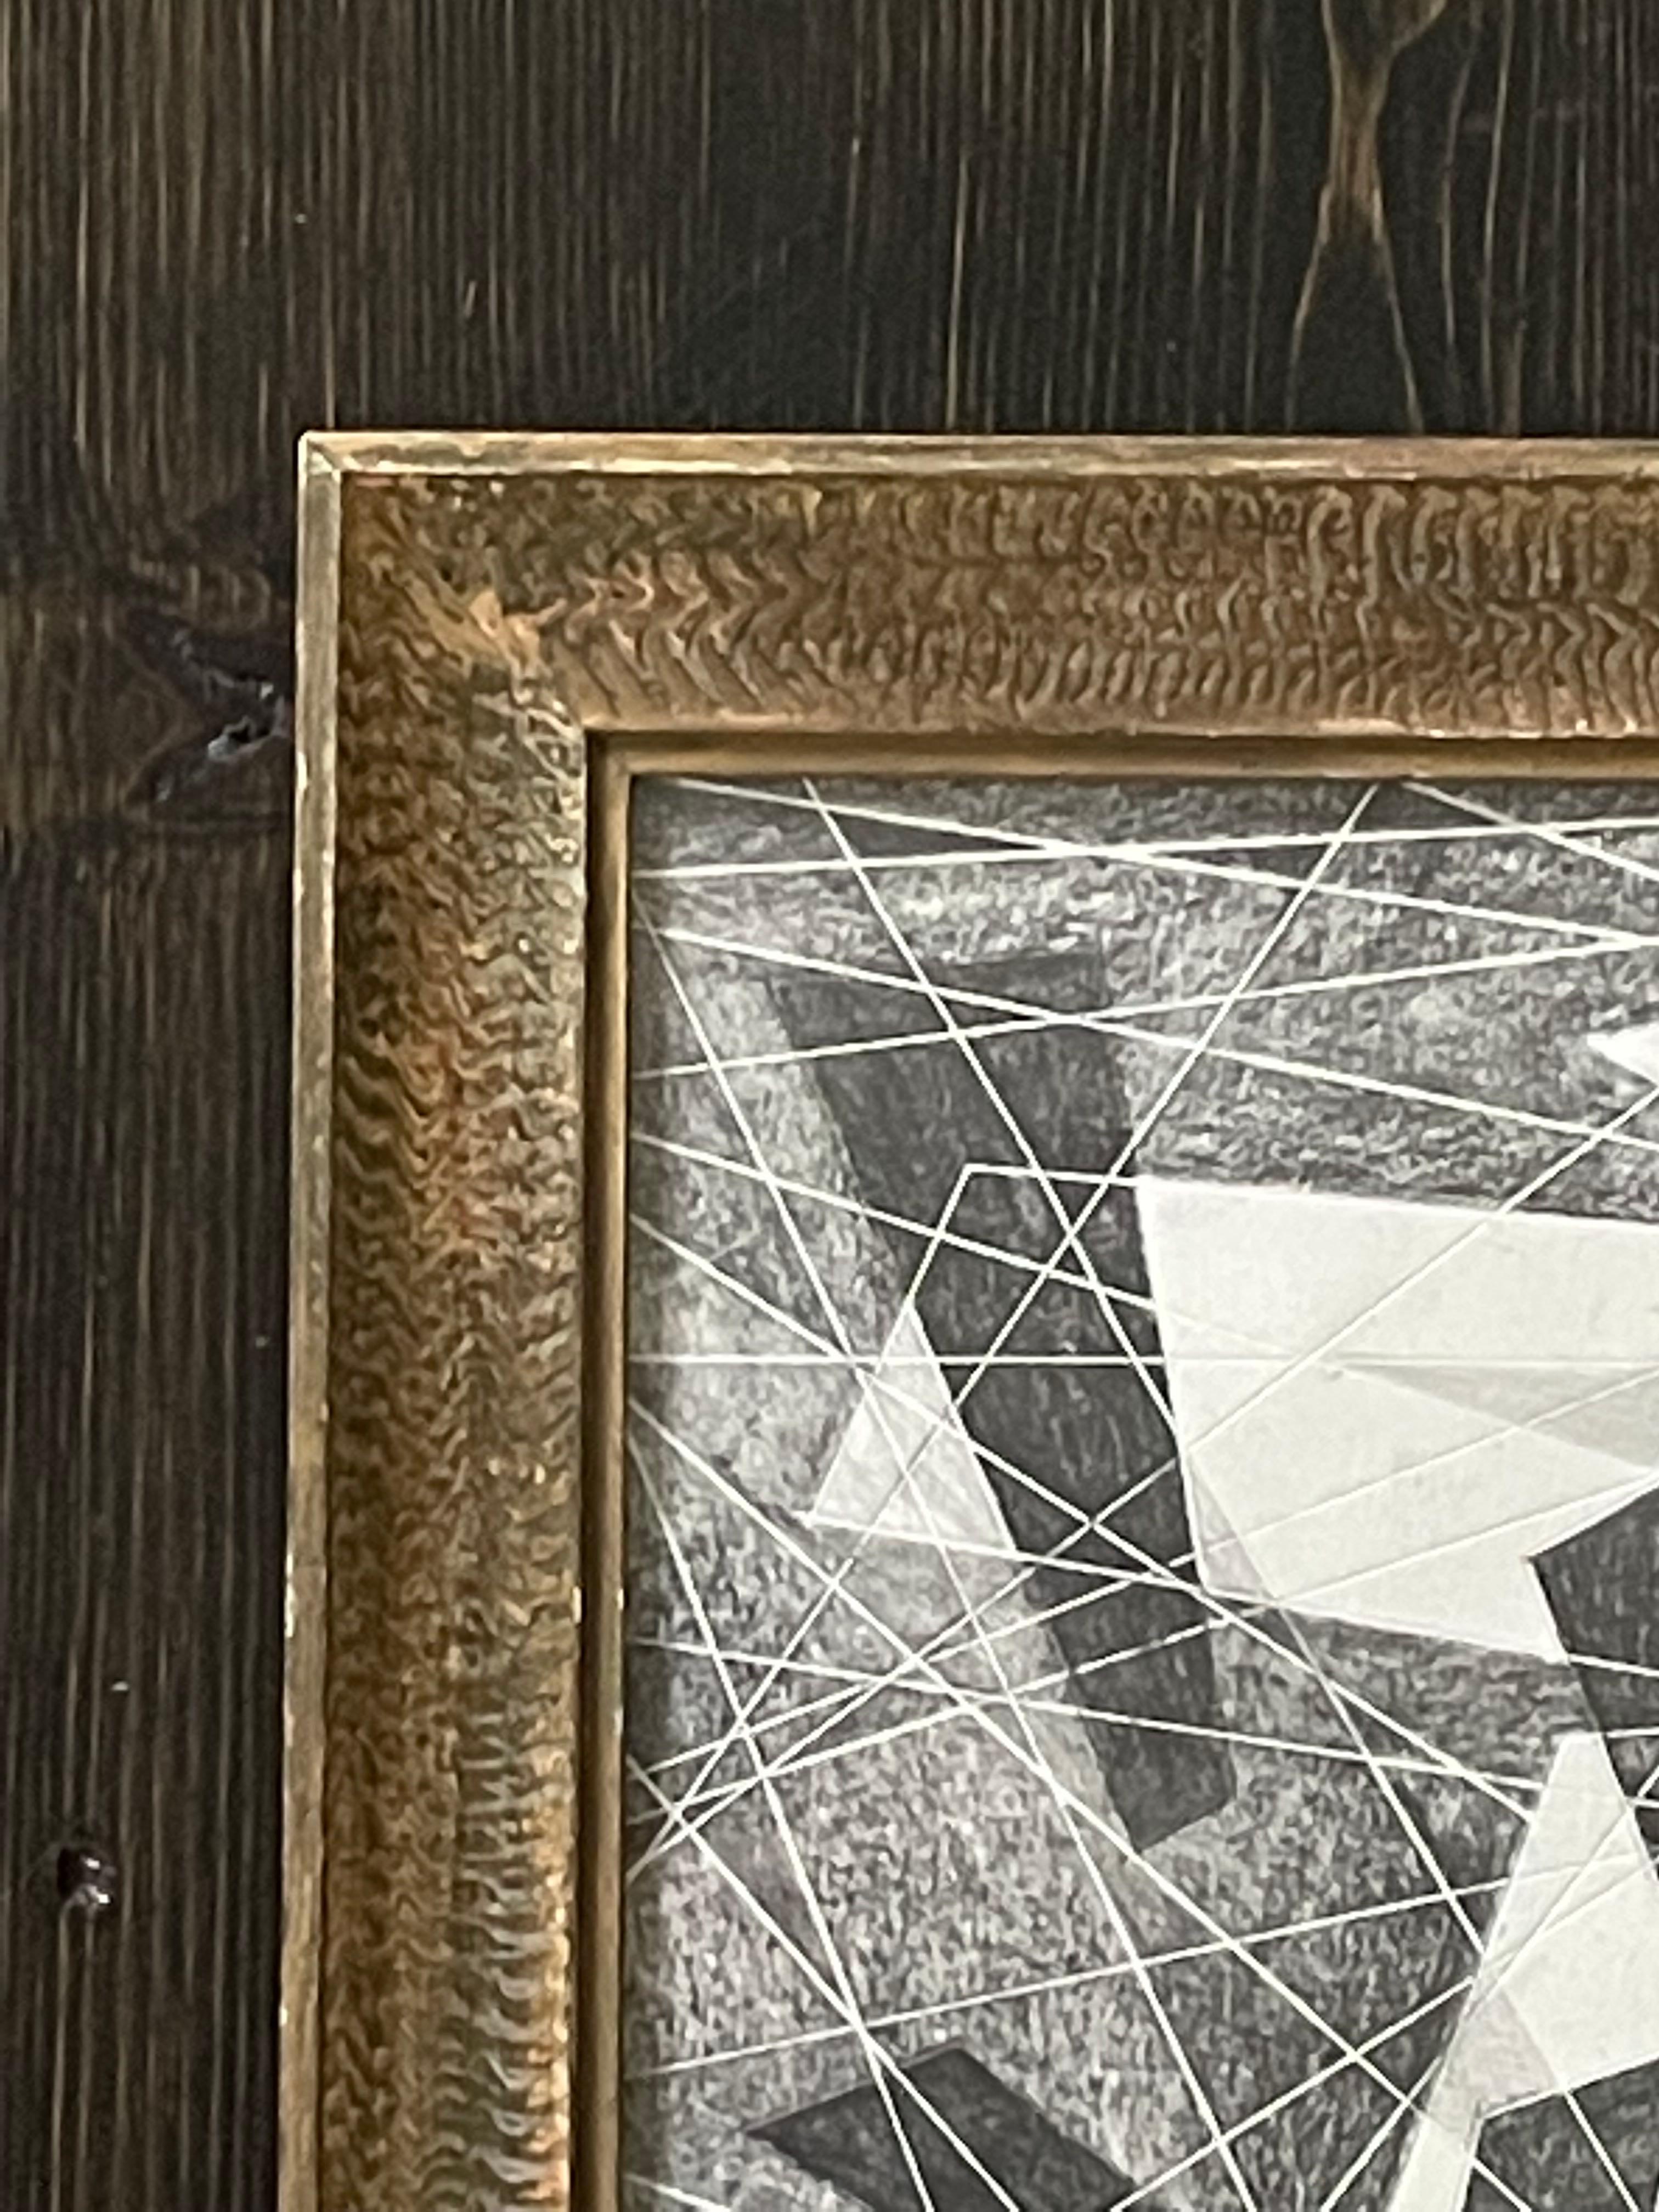 Original graphite drawing by American artist David Dew Bruner in 2015.
Study in trapezoid shapes.
Inspired by the artist Graham Sutherland.
This is one of many pieces from a large body of works by this artist.
Vintage gold gilt wood frame. 
 